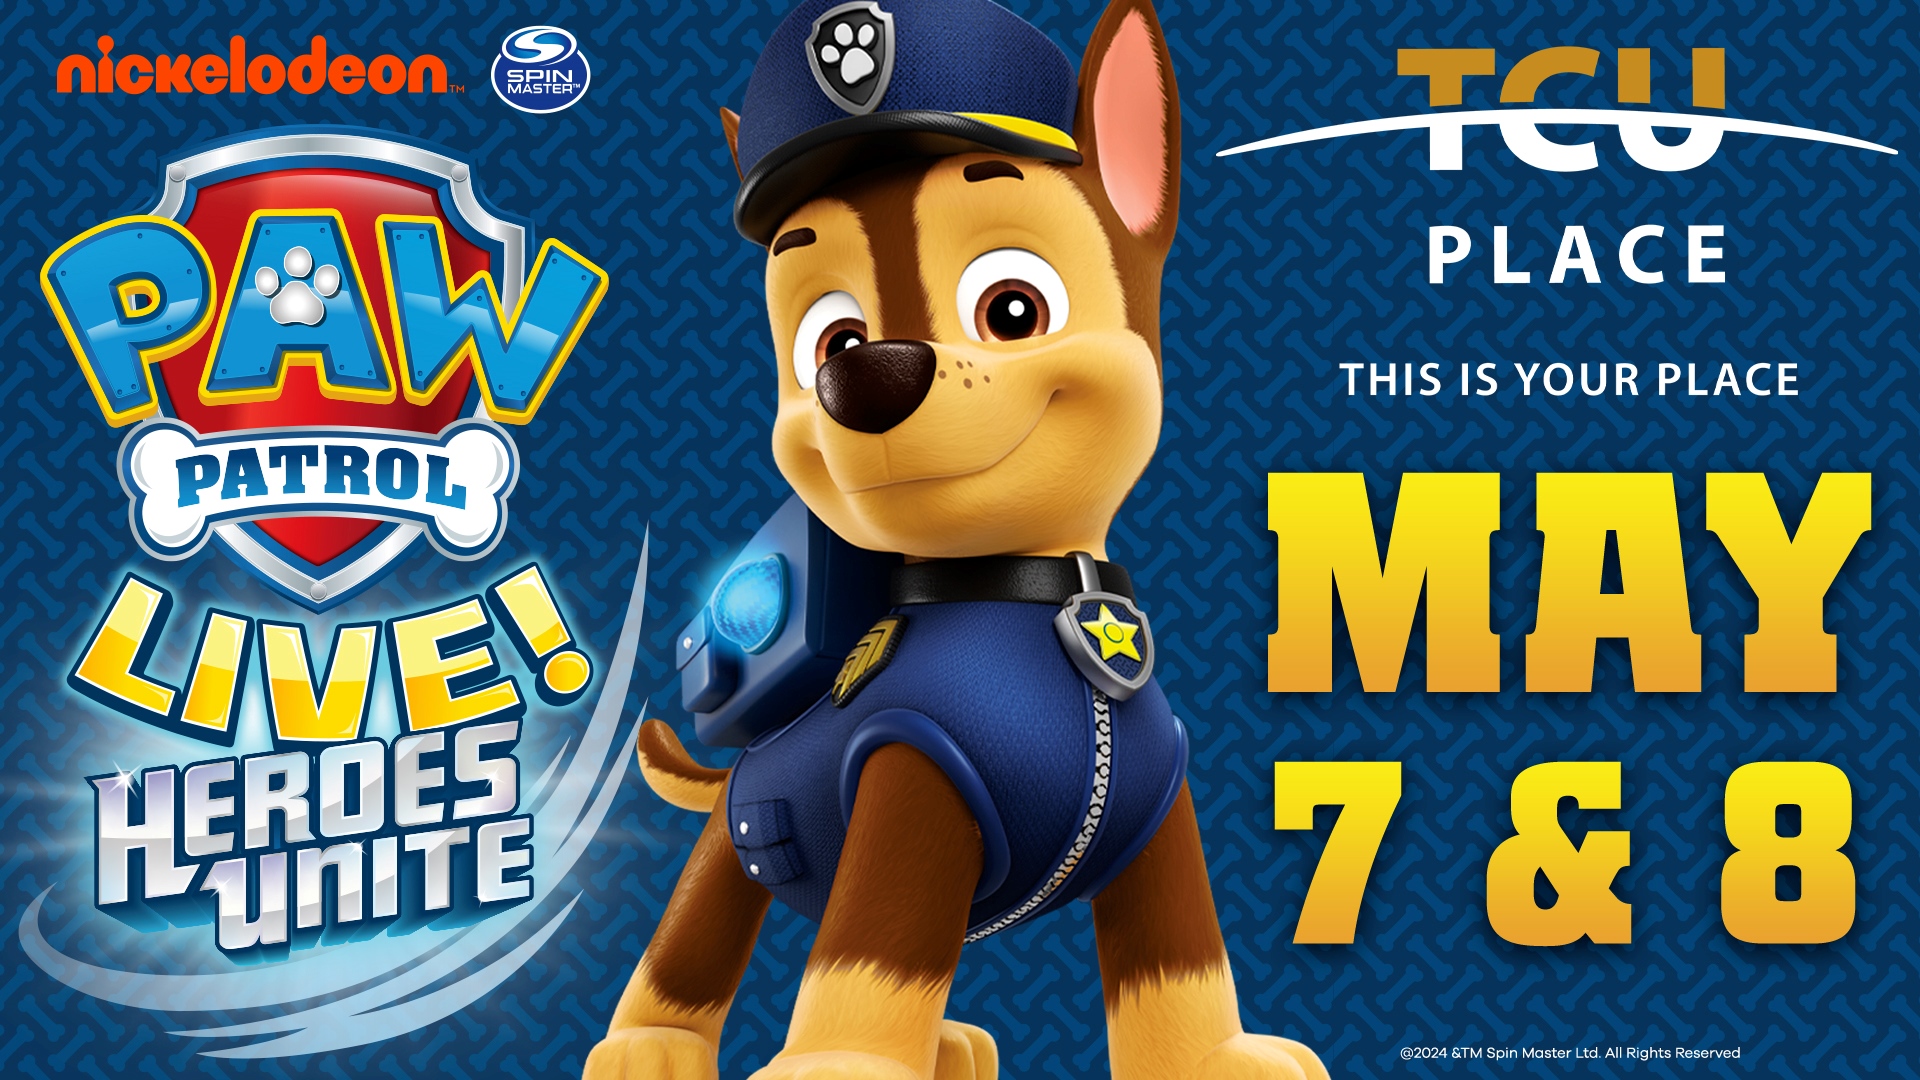 Paw Patrol Live! "Heroes Unite" - May 7th and 8th at TCU Place